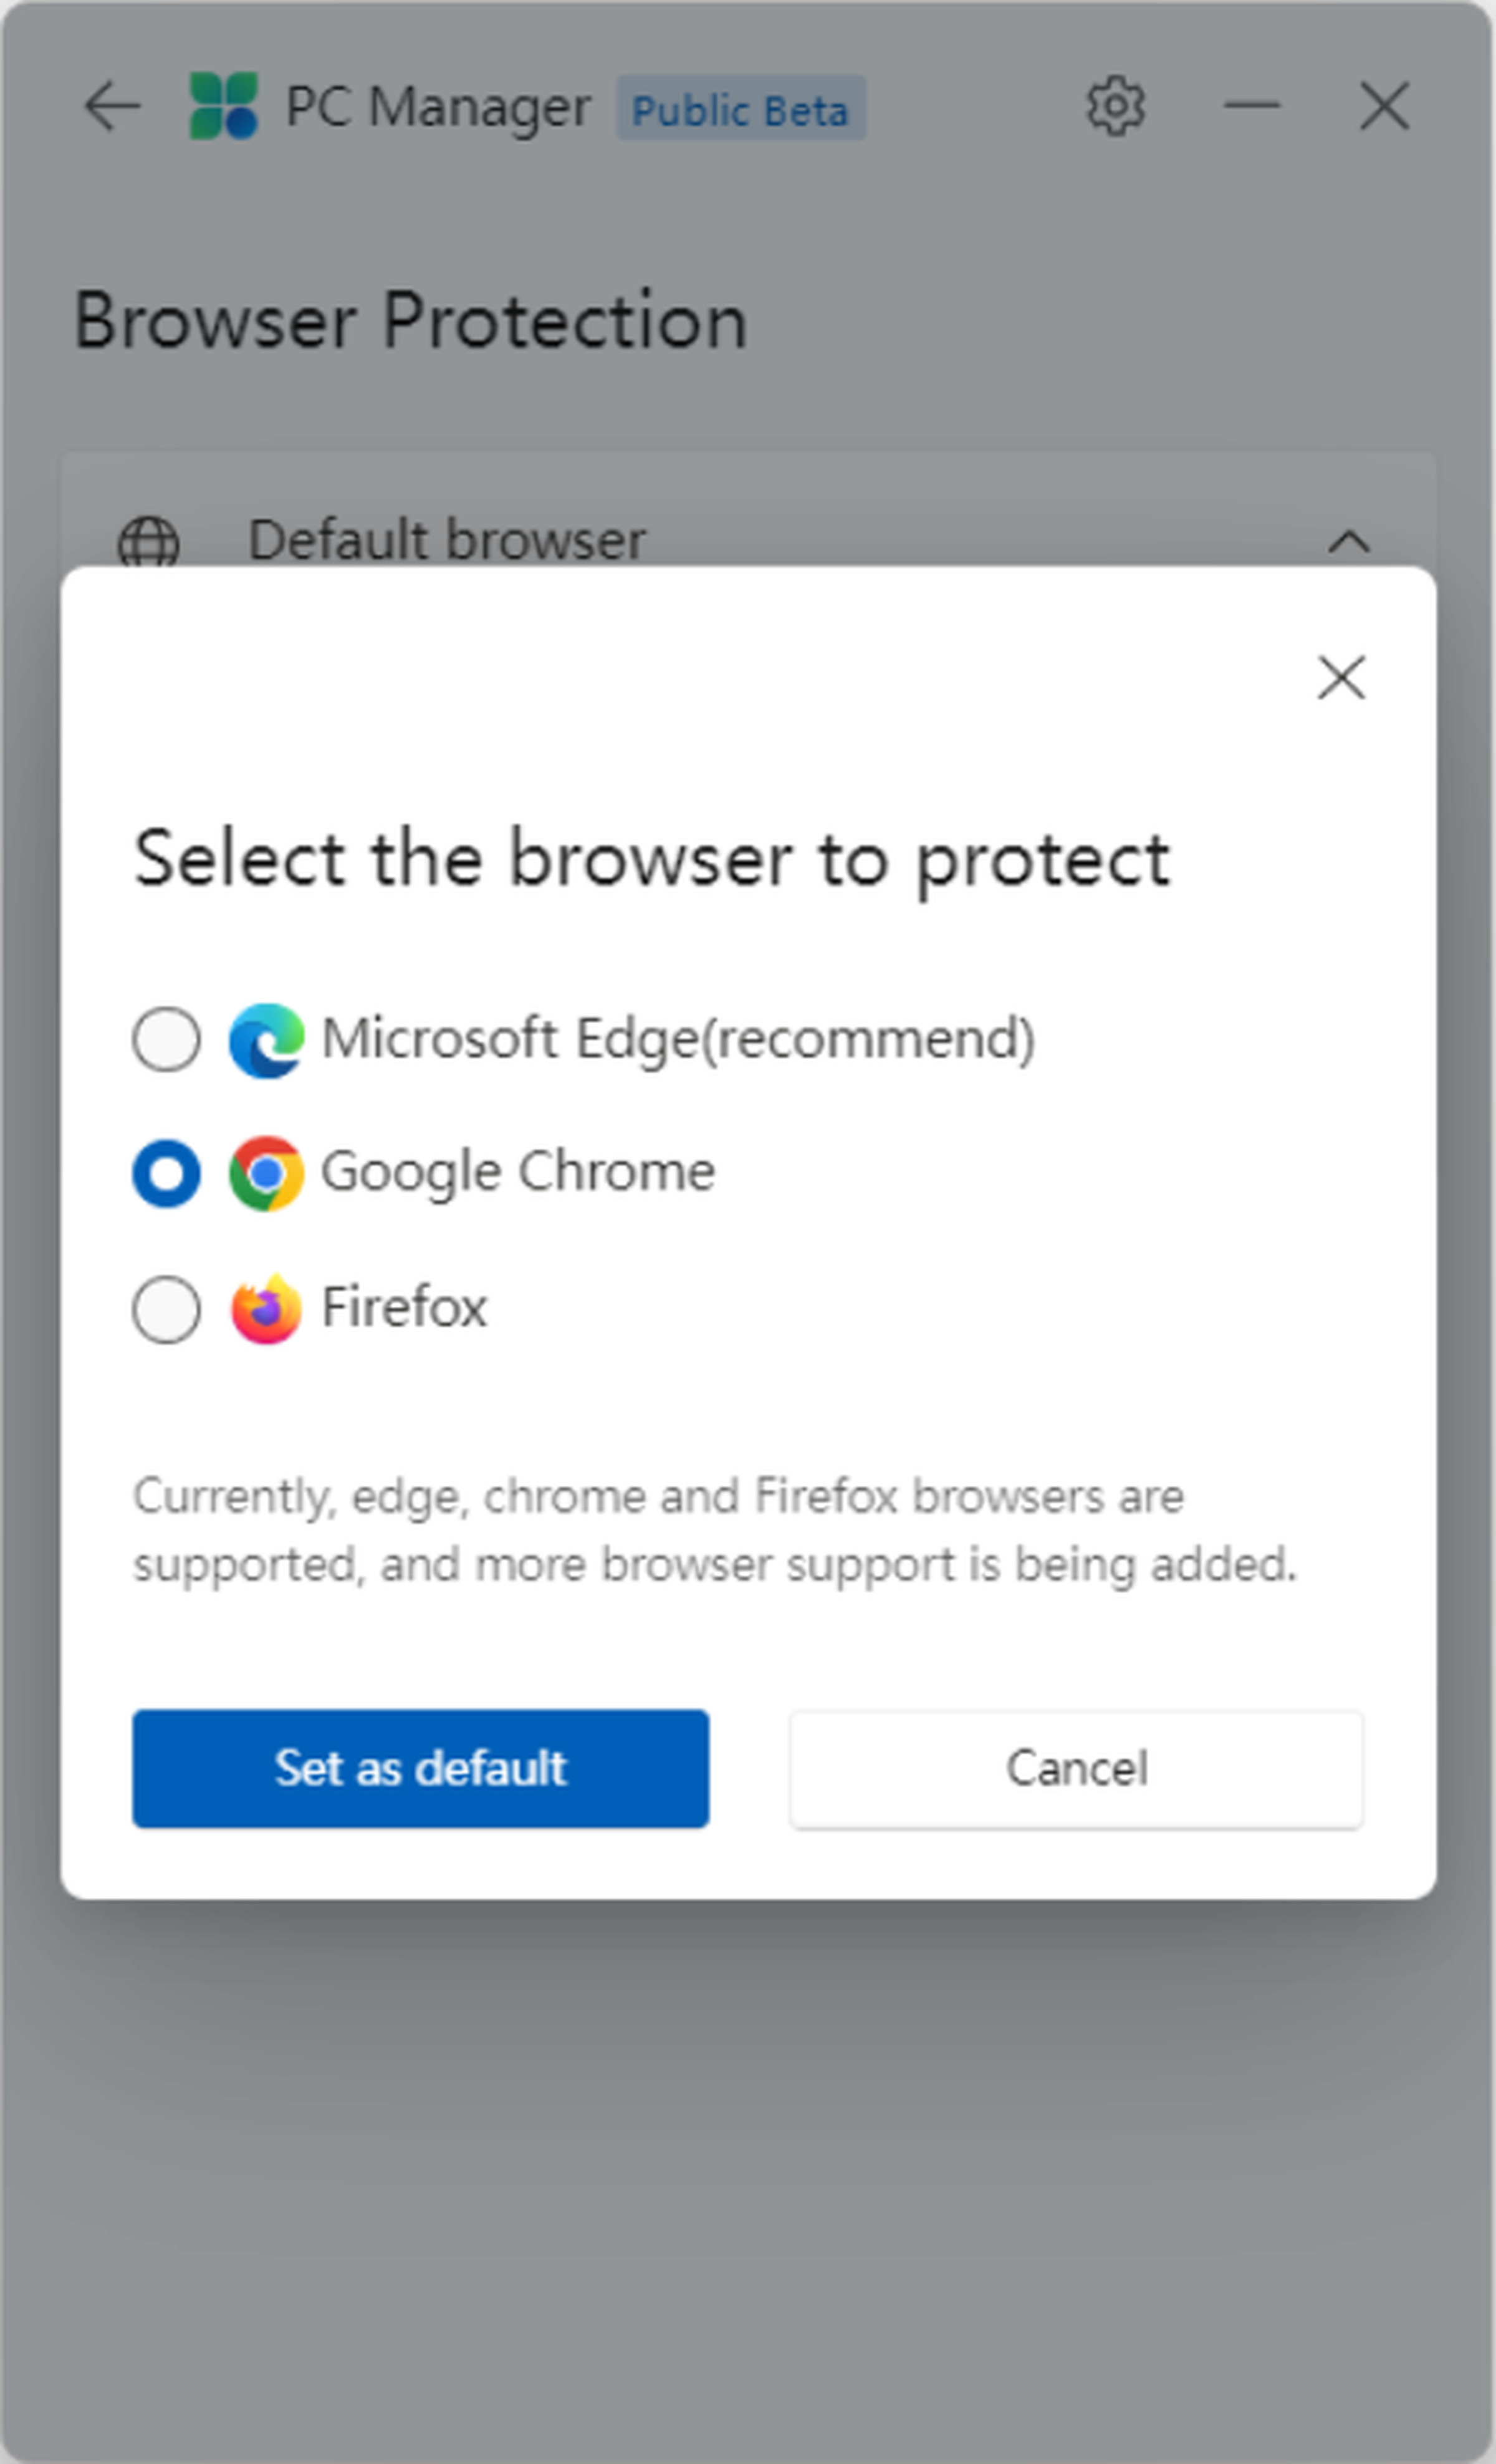 You can easily switch default browsers with this app.